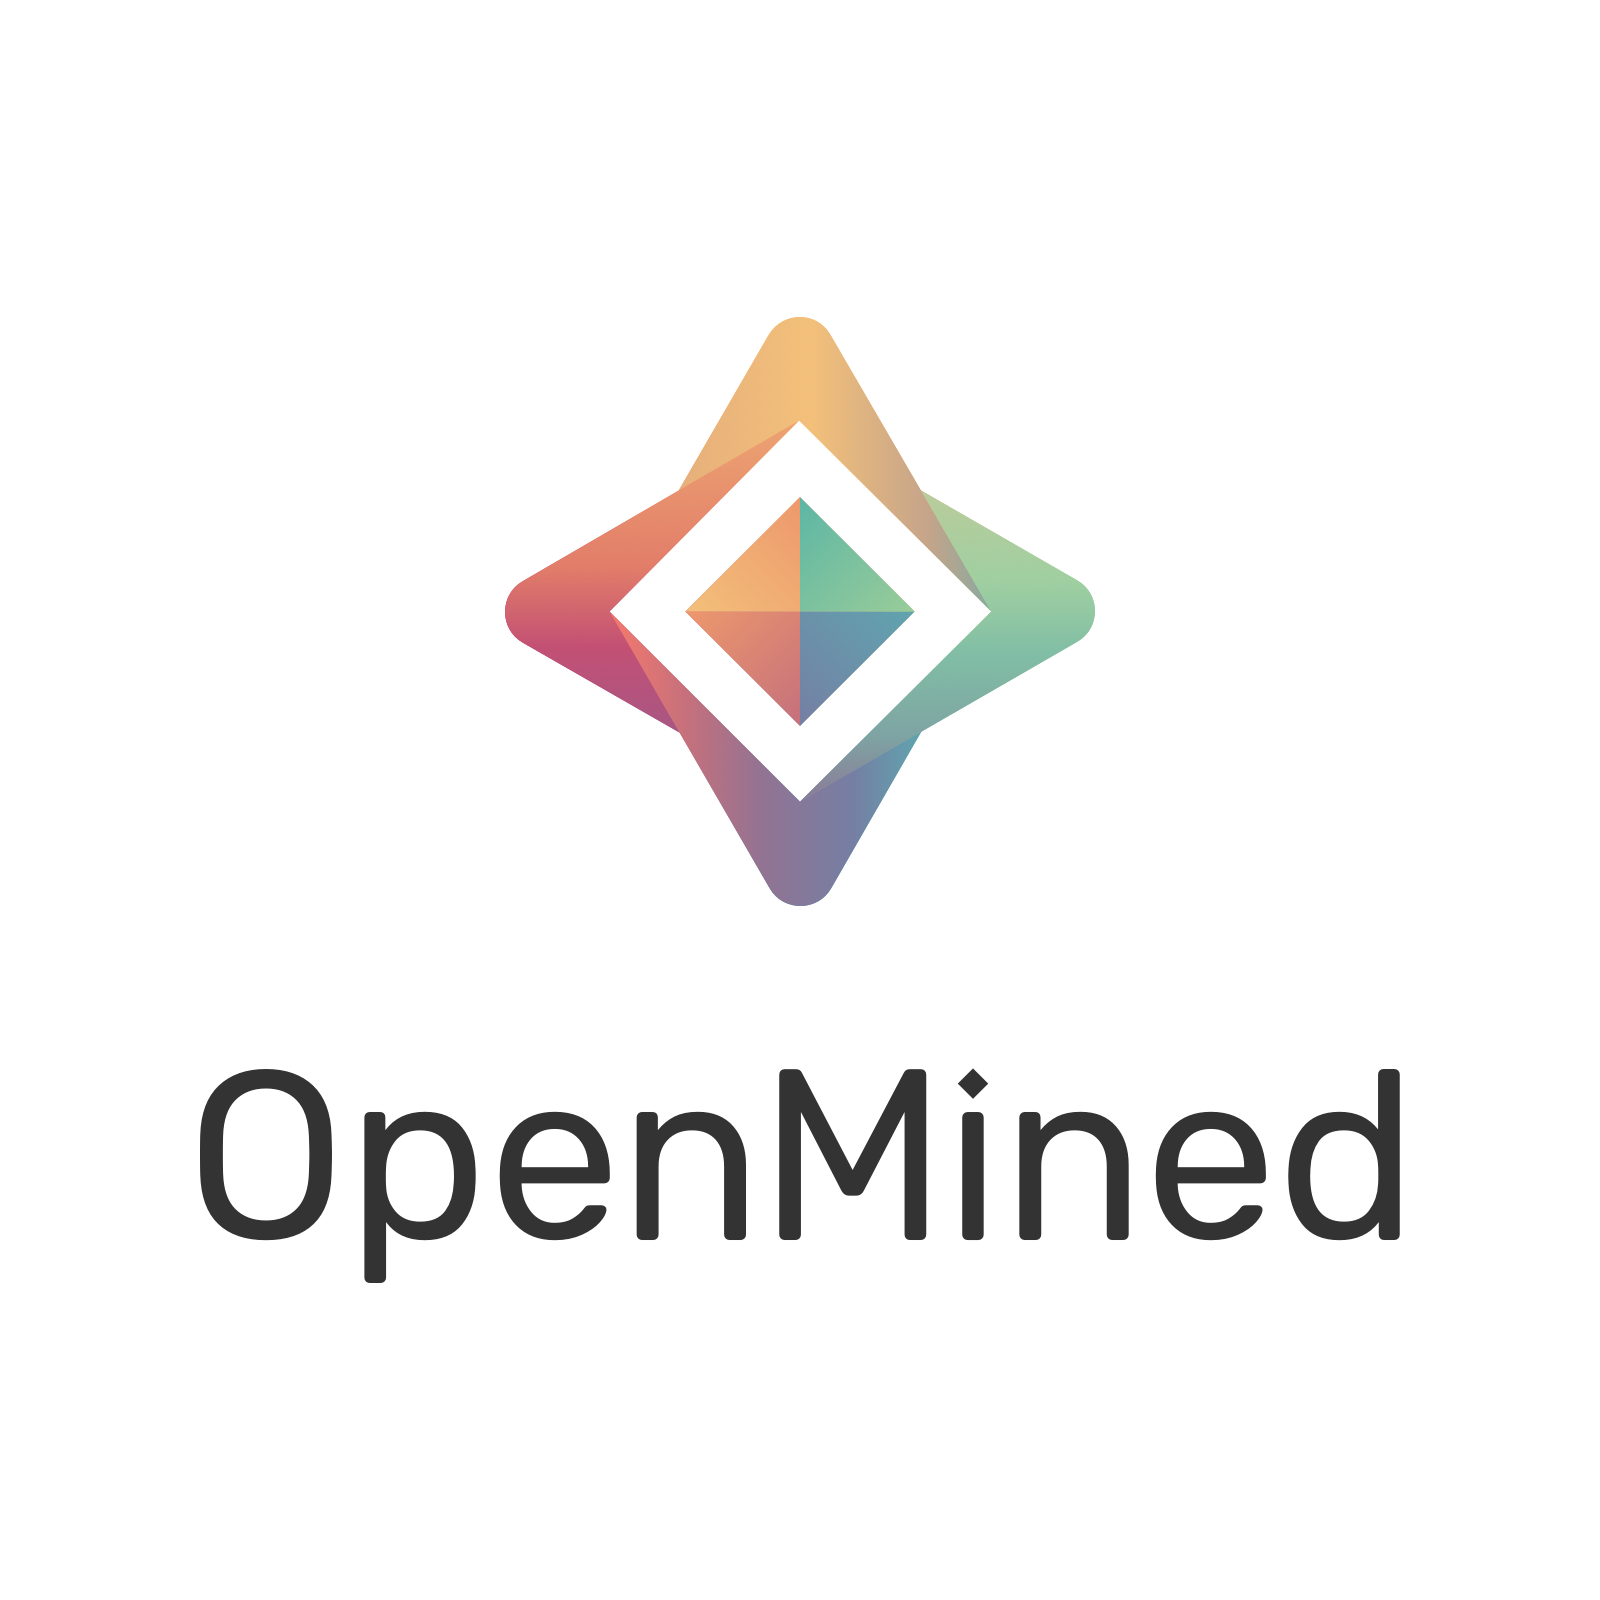 OpenMined